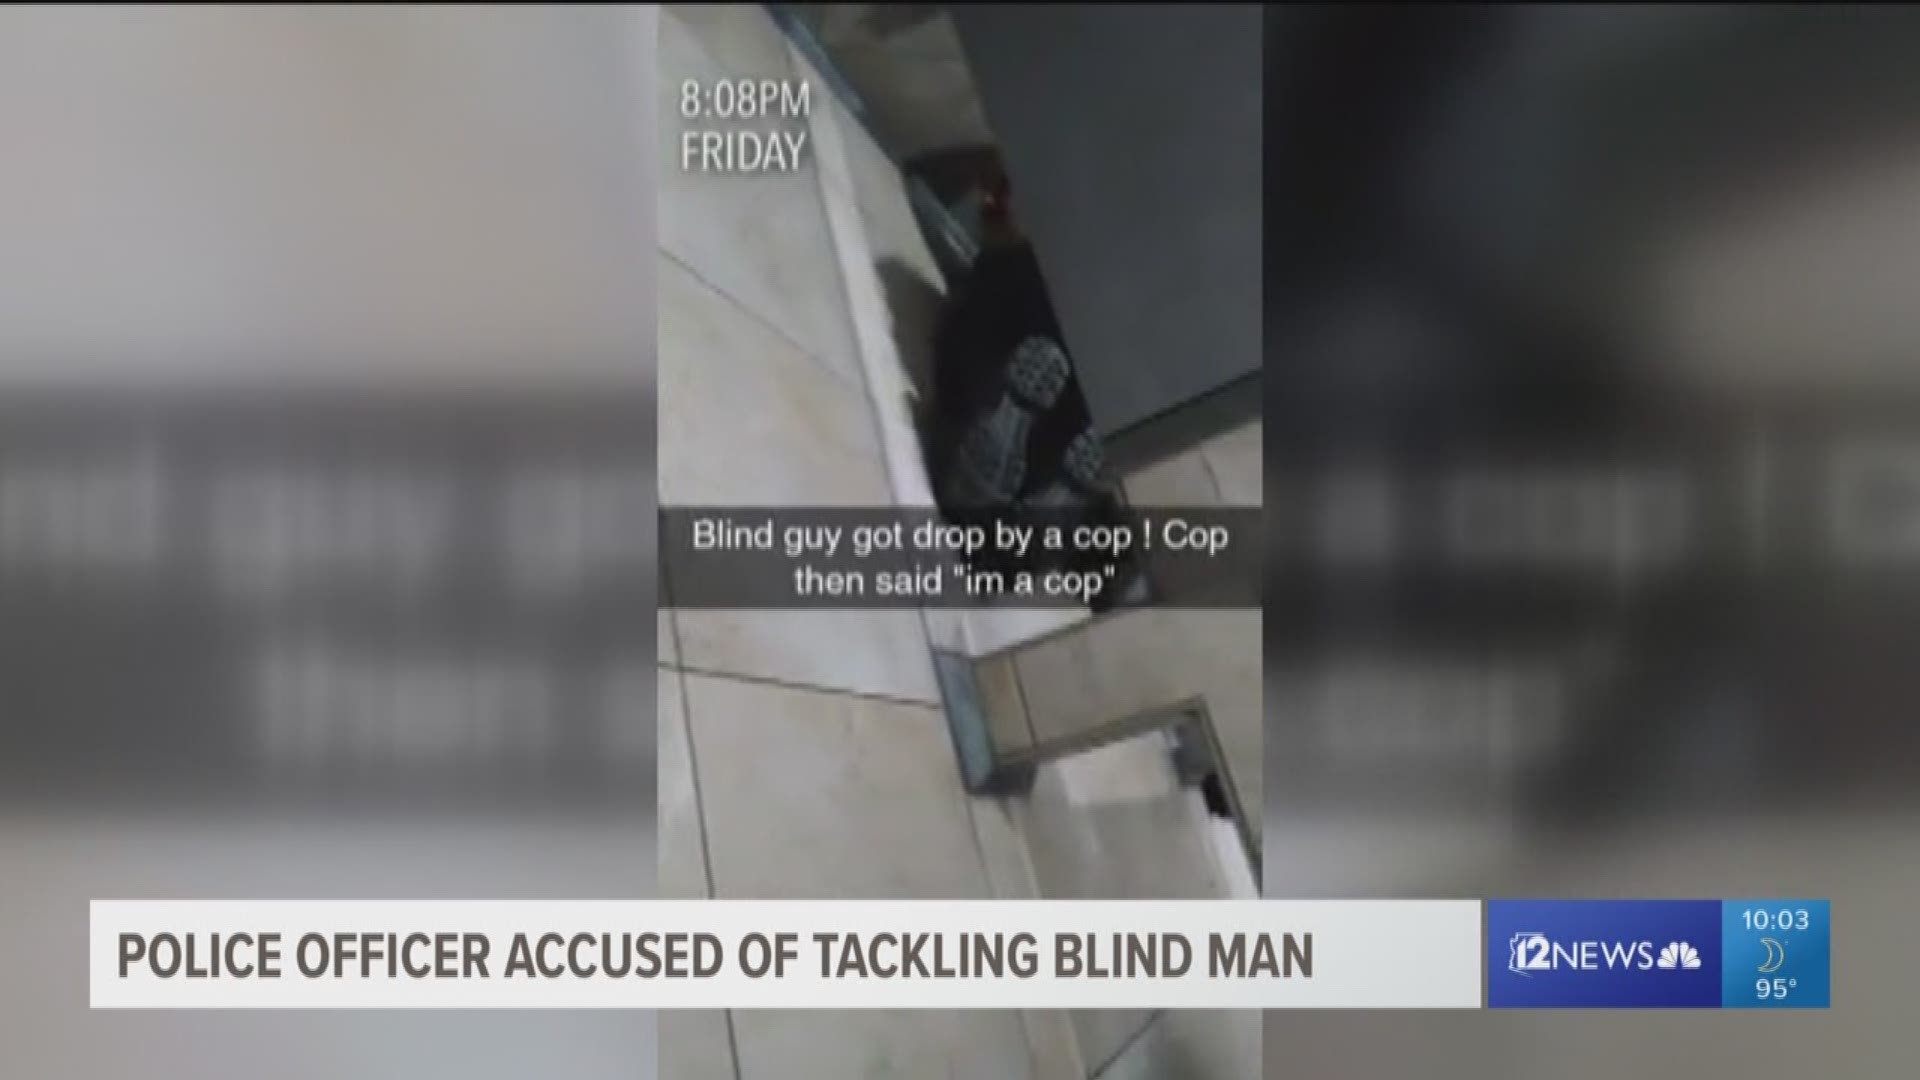 A blind man claims he was slammed to the ground and falsely arrested by a Phoenix police officer, in an incident that was partially caught on camera by a bystander.